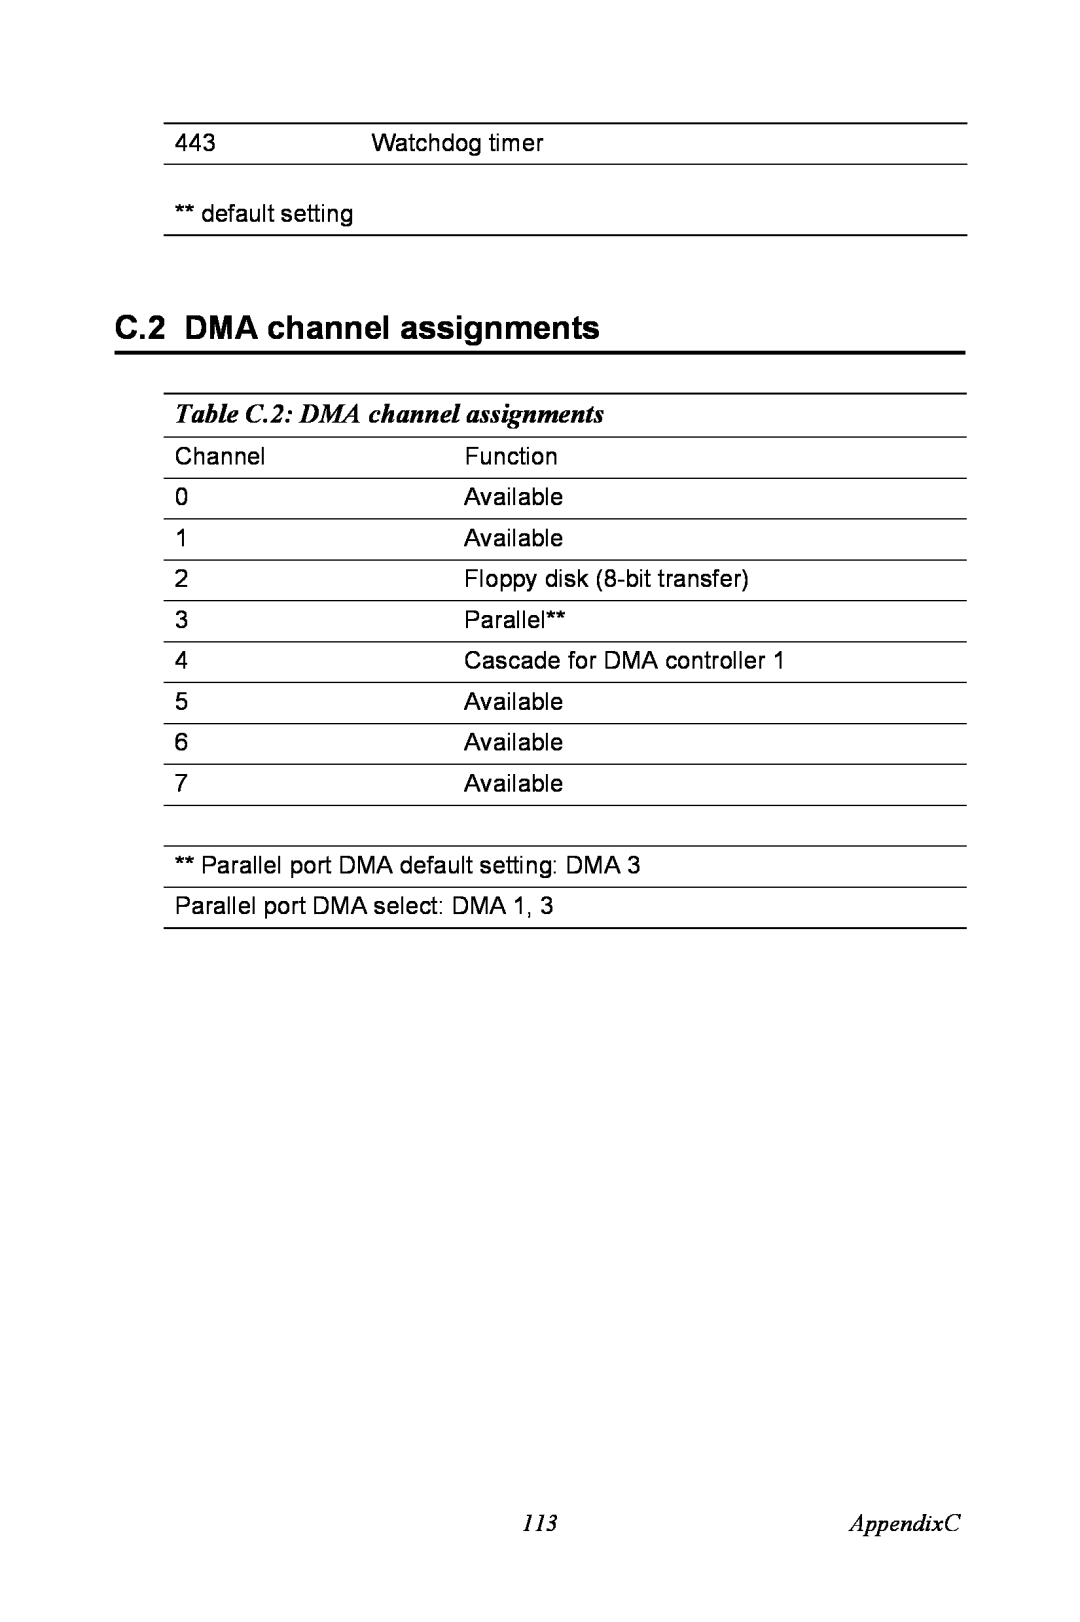 Intel PCM-3370 user manual Table C.2 DMA channel assignments, AppendixC 